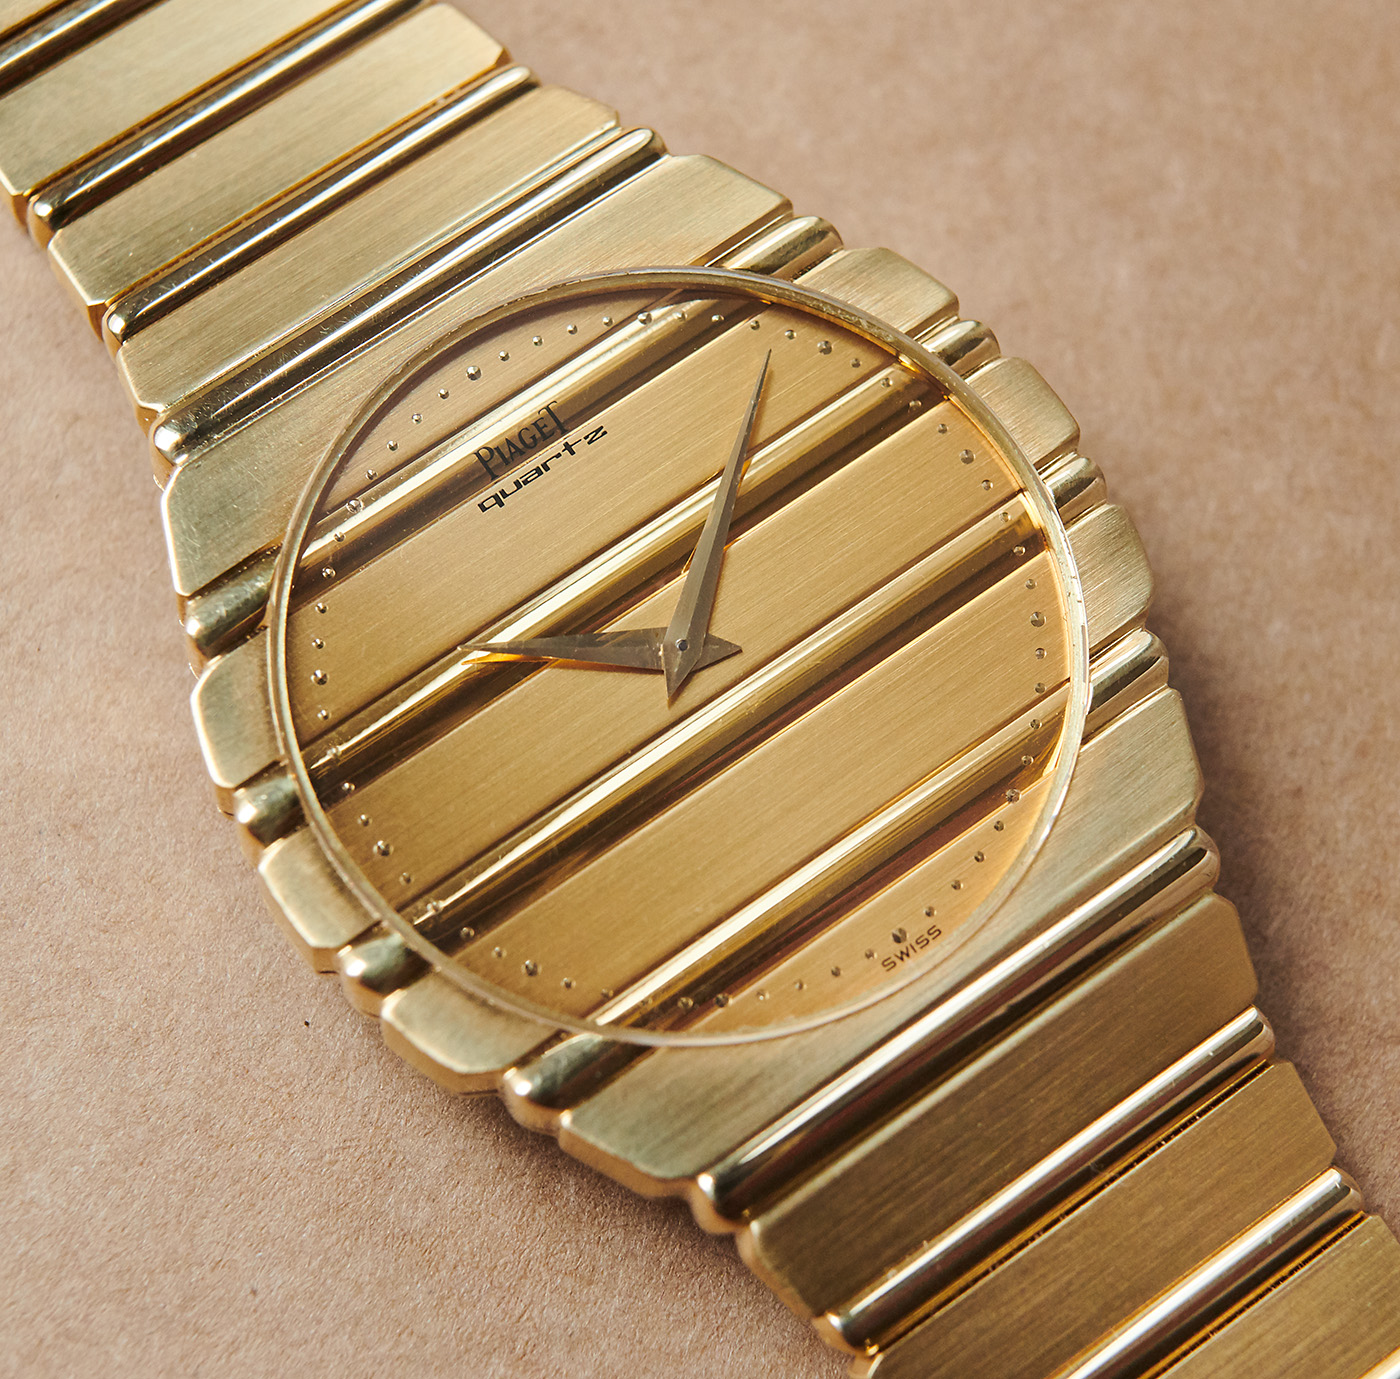 Piaget Polo 7661 from 1980